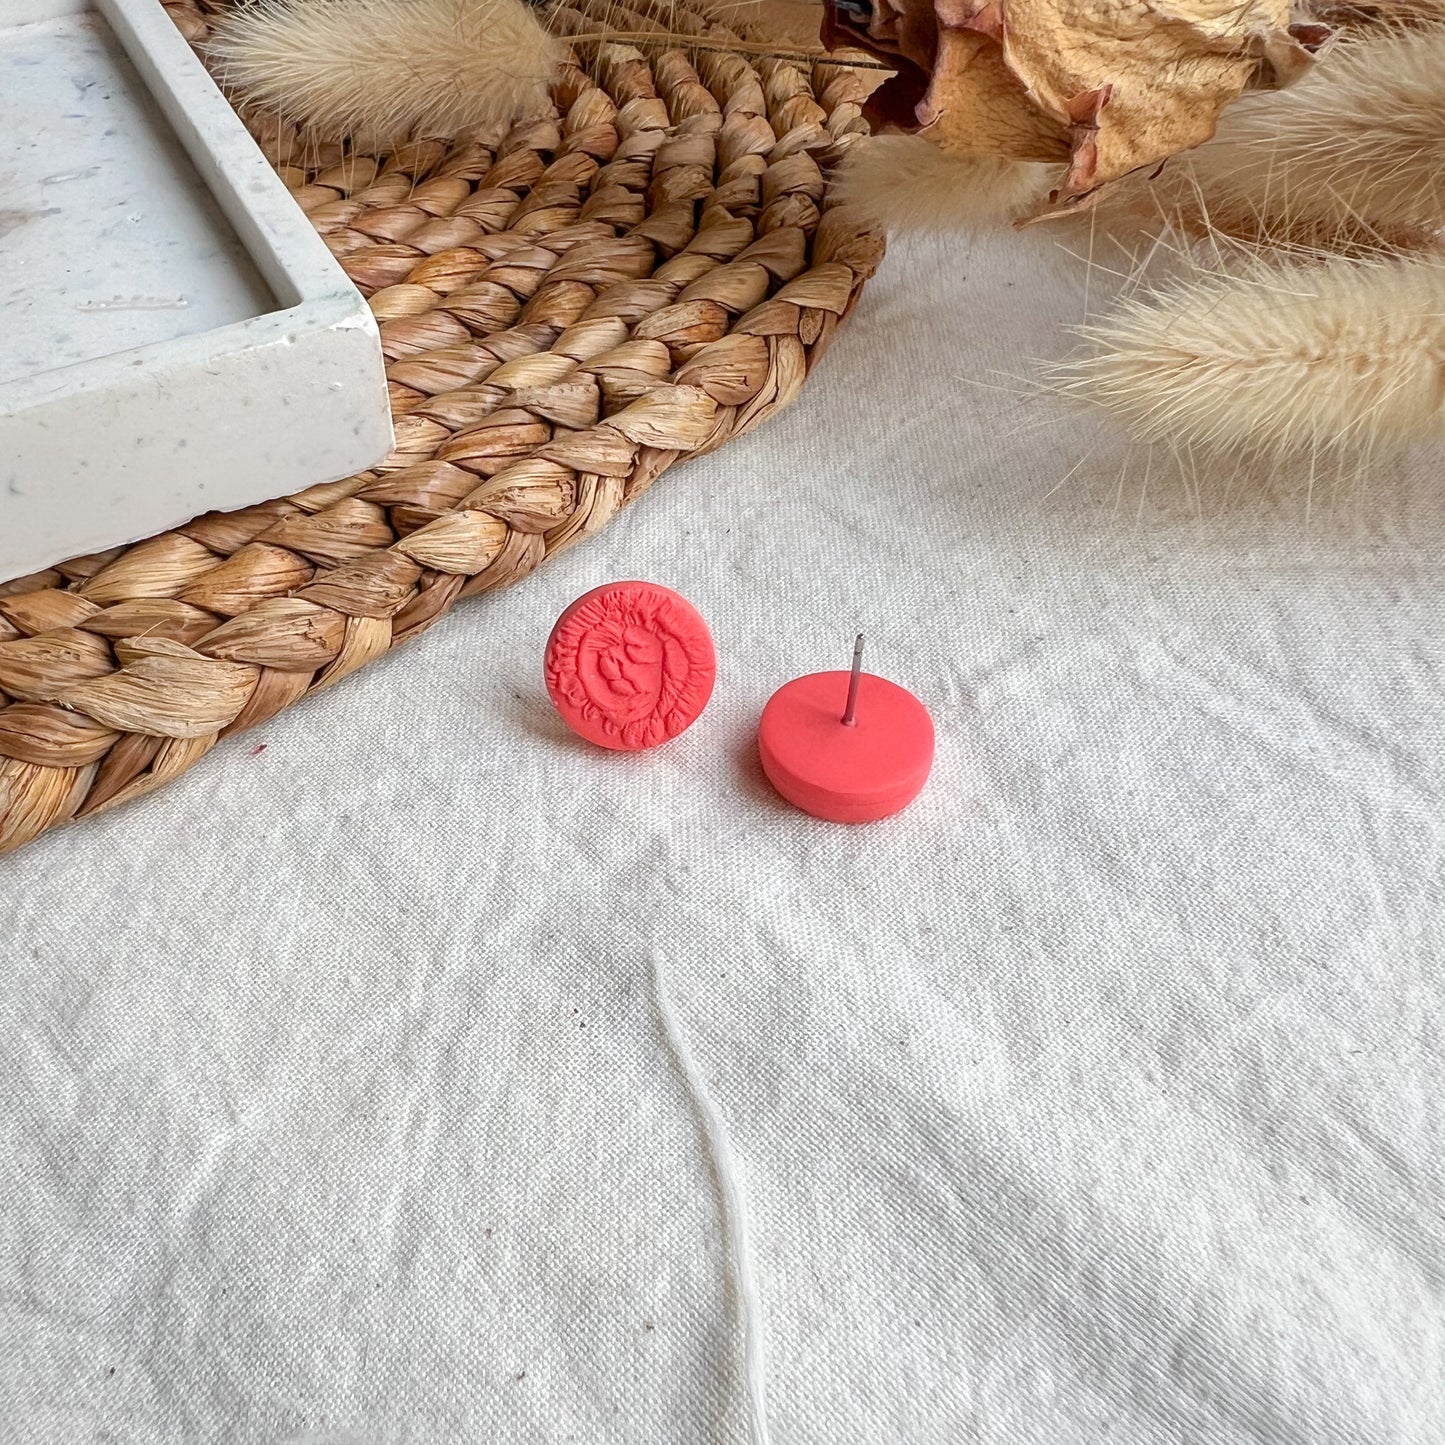 ROUND | Medium round flower textured stud earrings in bright coral red